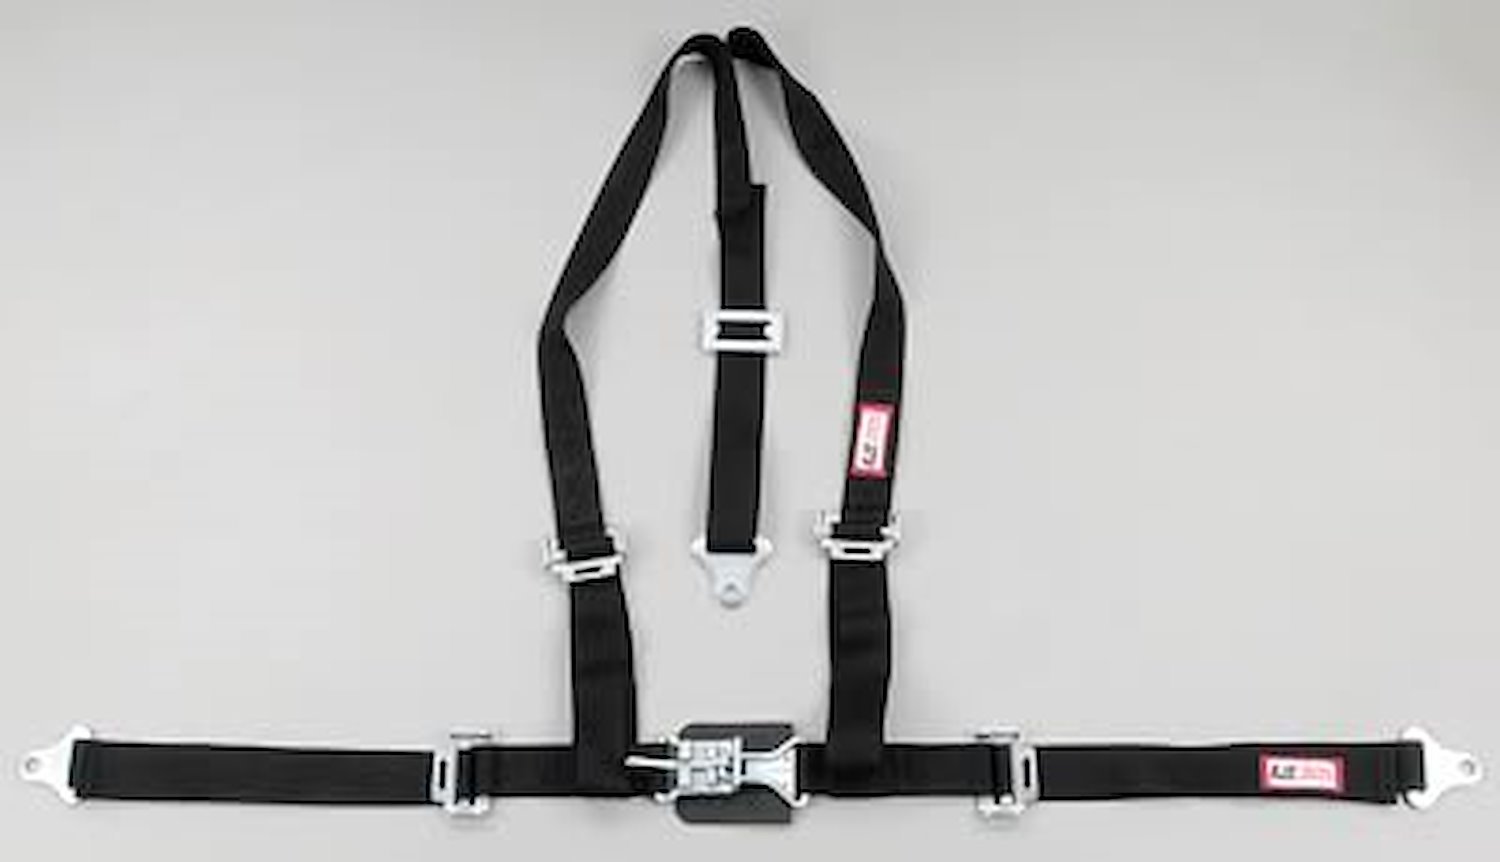 NON-SFI L&L HARNESS 3 PULL UP Lap BELT SEWN IN 2 S.H. Y FLOOR Mount w/STERNUM STRAP ALL WRAP ENDS HOT PINK